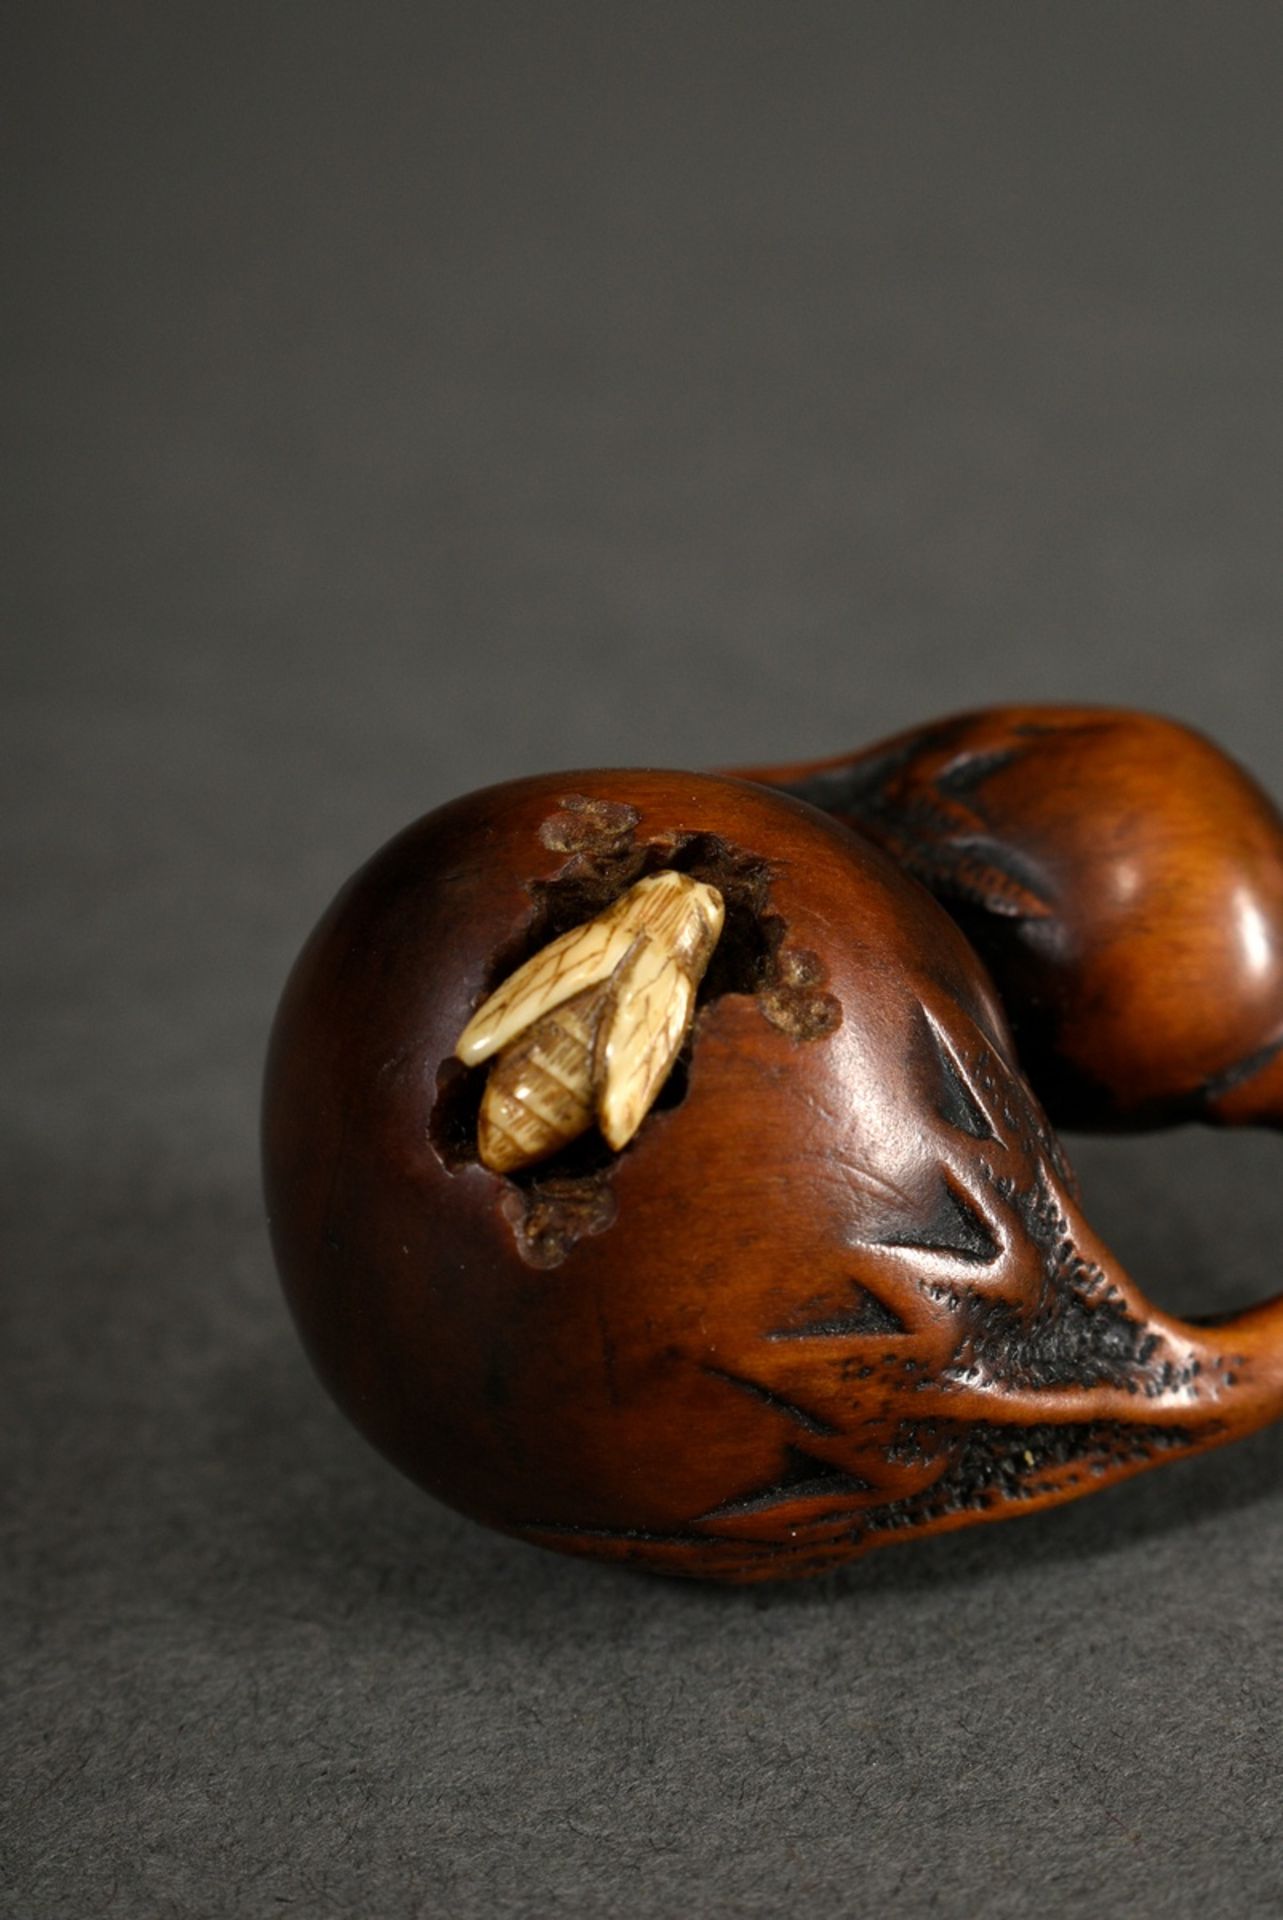 Boxwood netsuke "Small and large aubergine", with a wasp made of staghorn worked into the large aub - Image 4 of 5